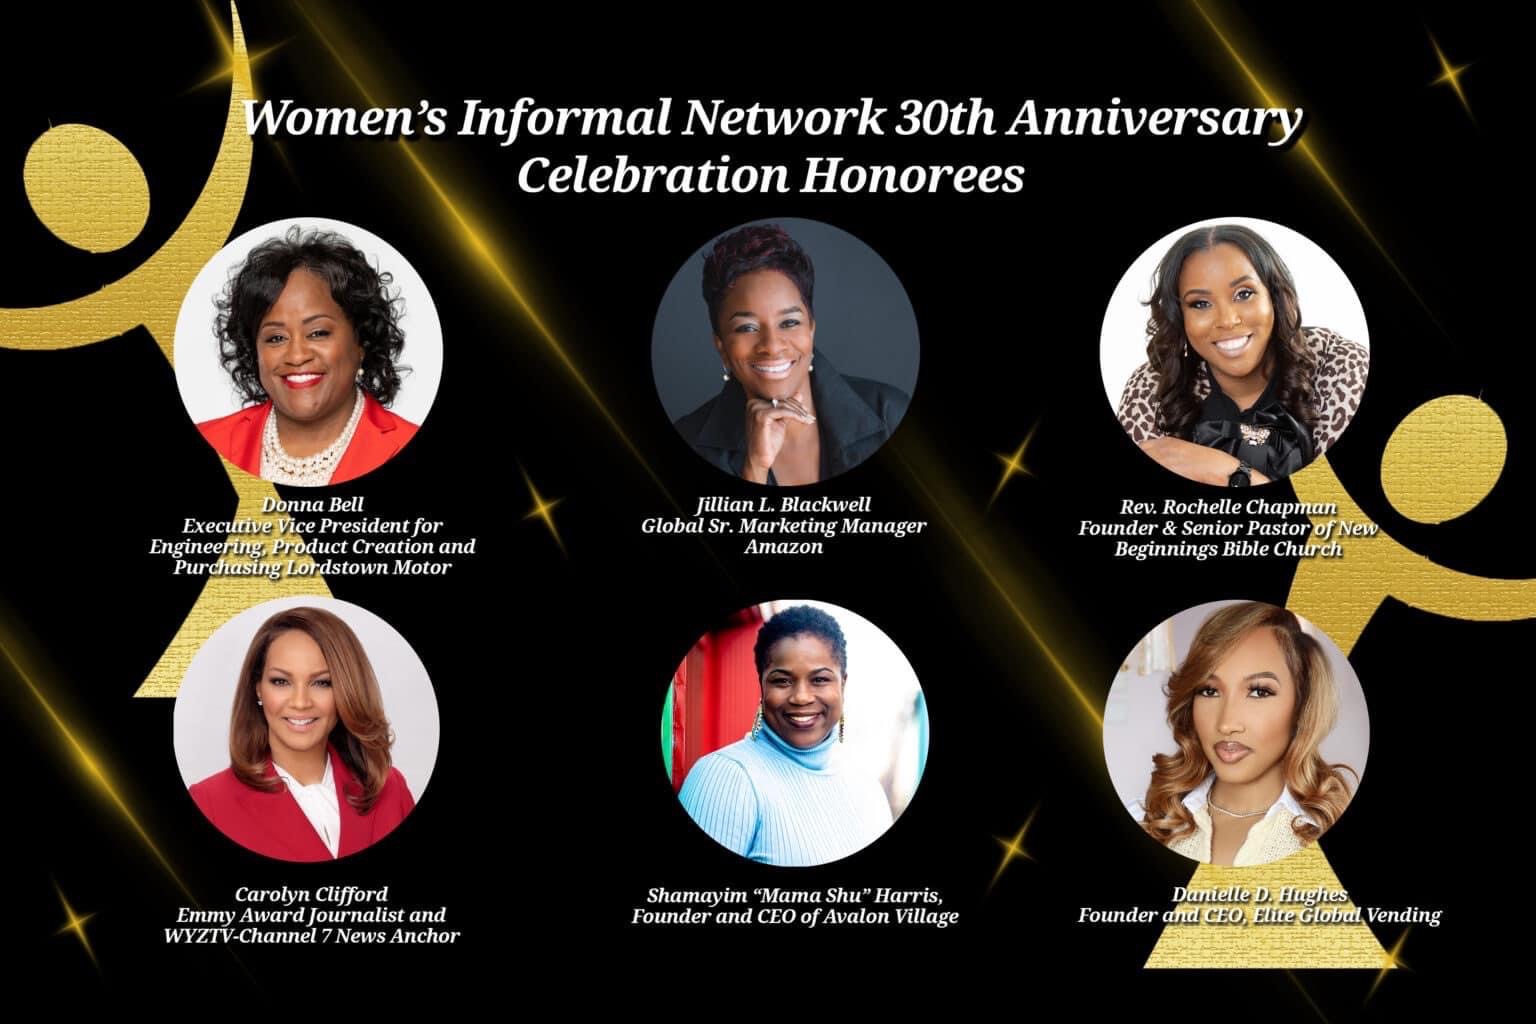 Rochelle Chapman and other honorees